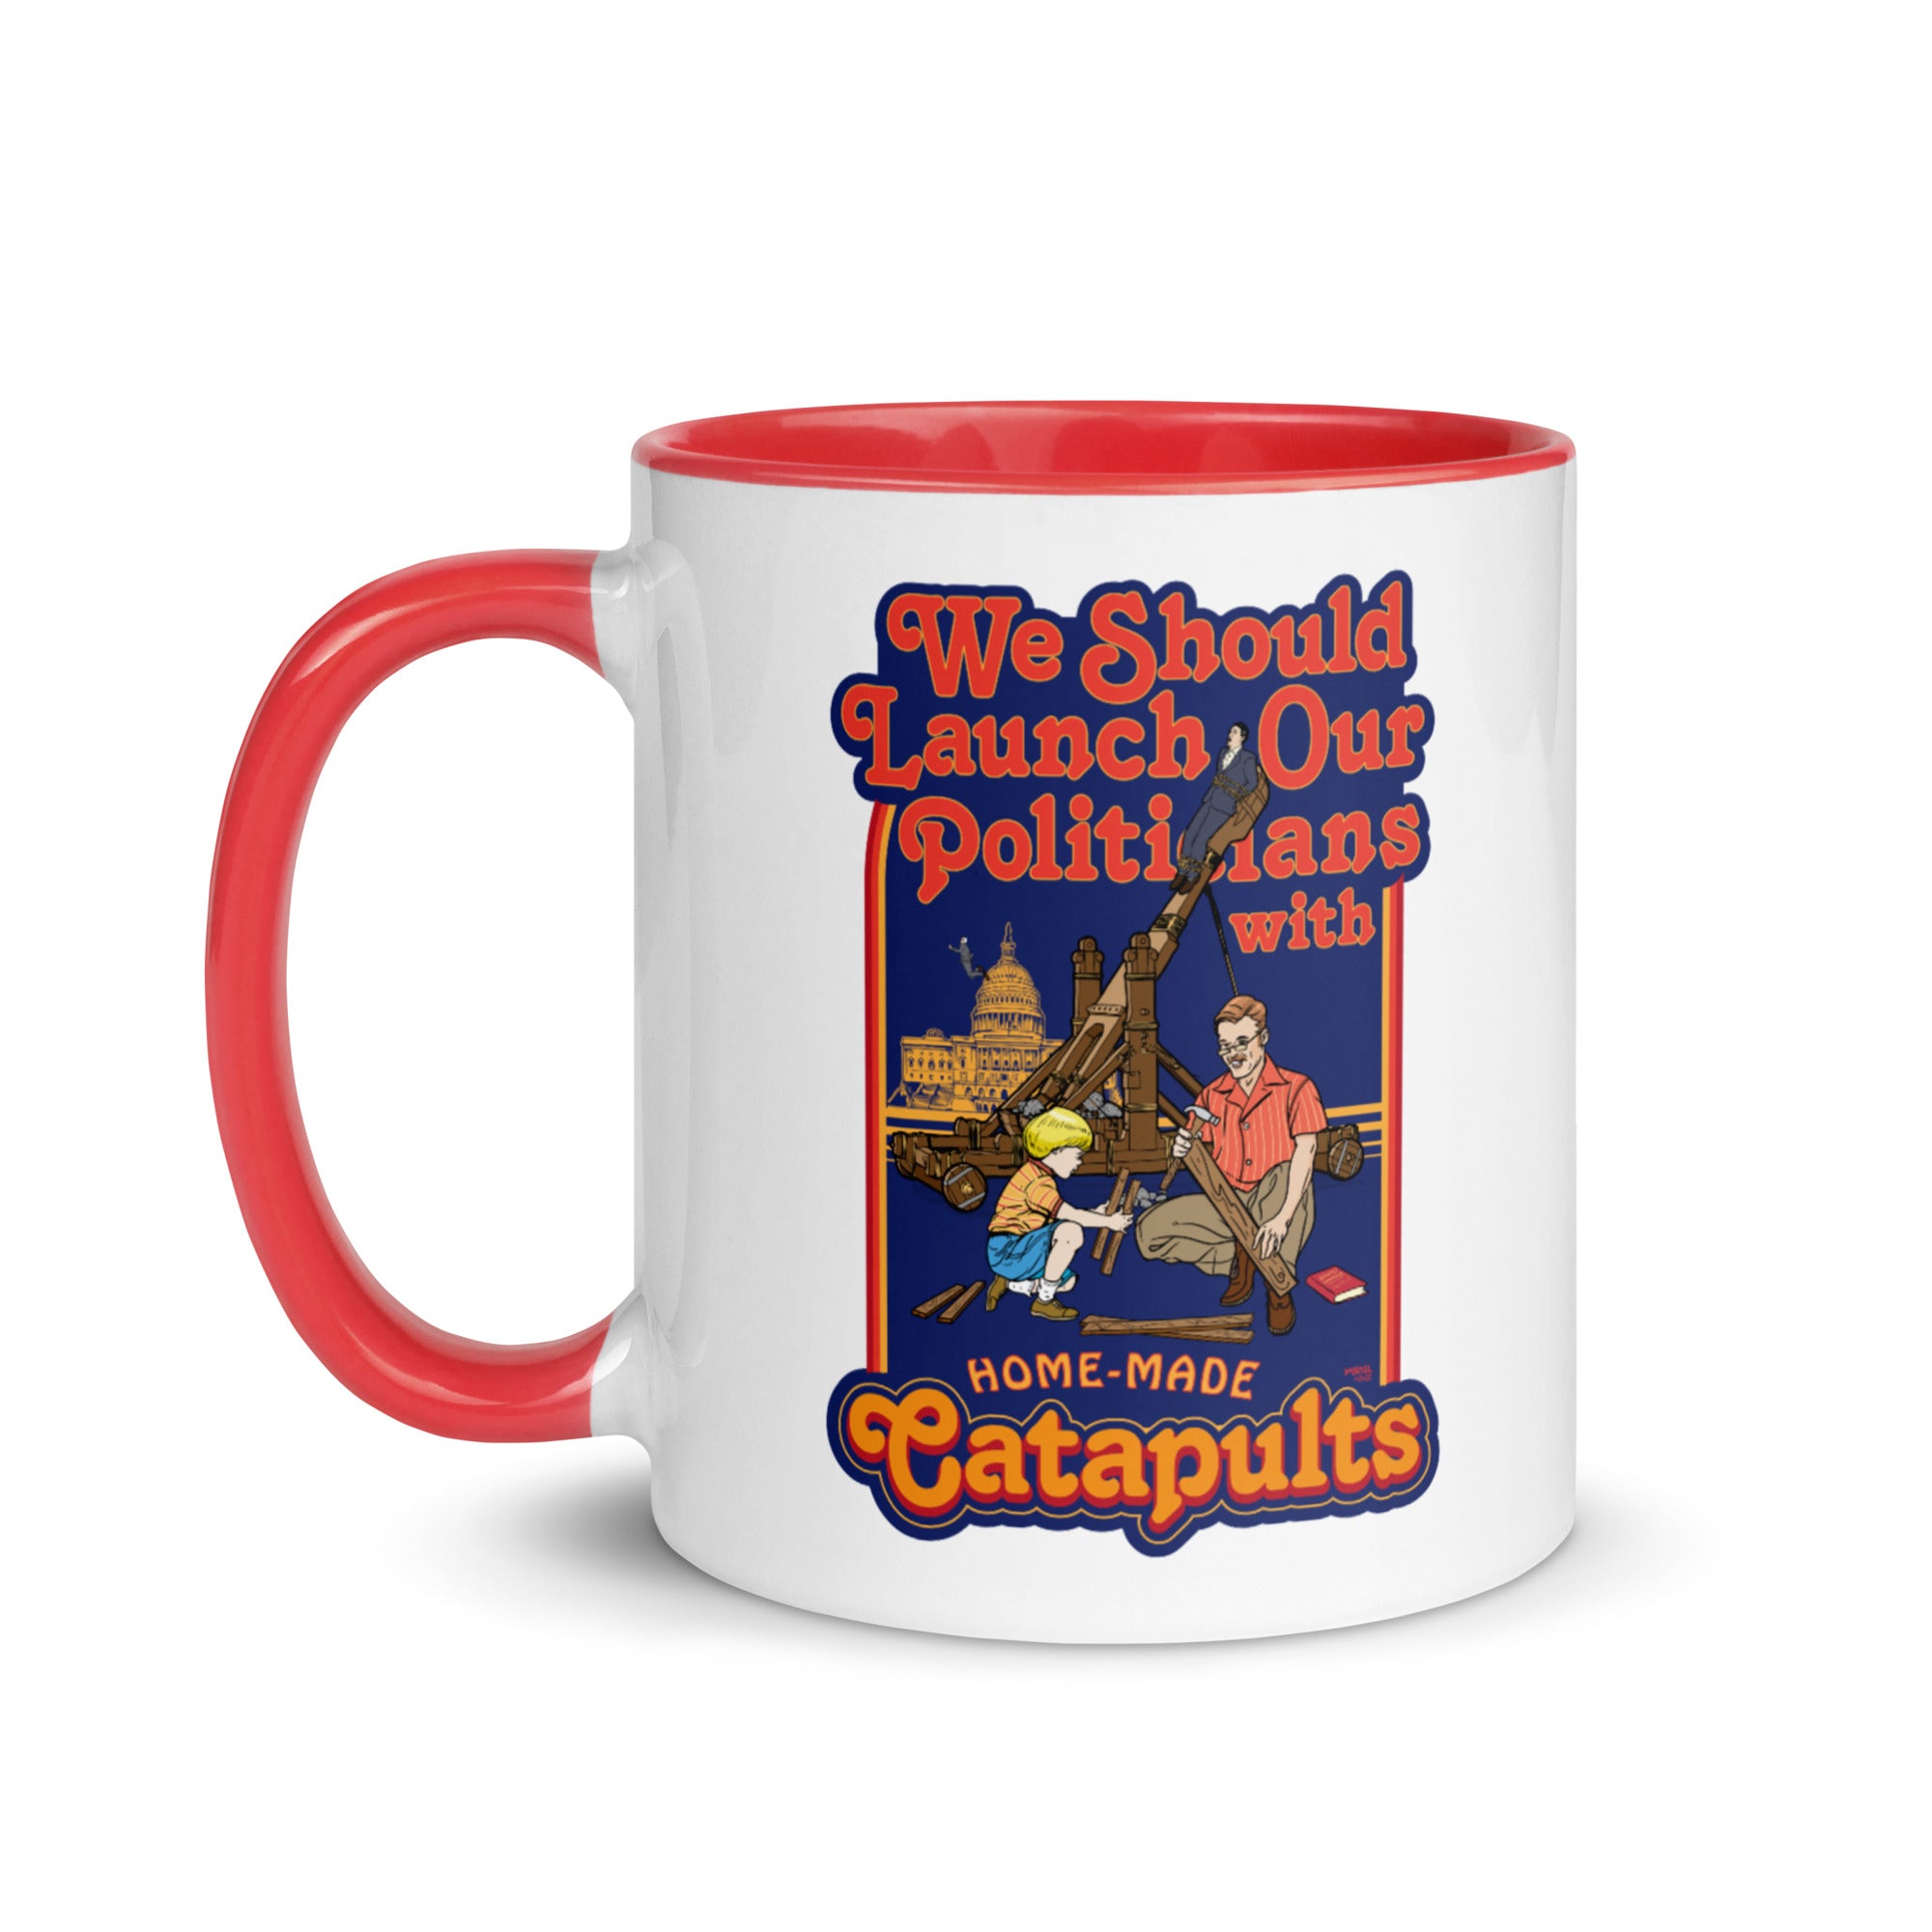 We Should Launch Our Politicians from Catapults Color Mug